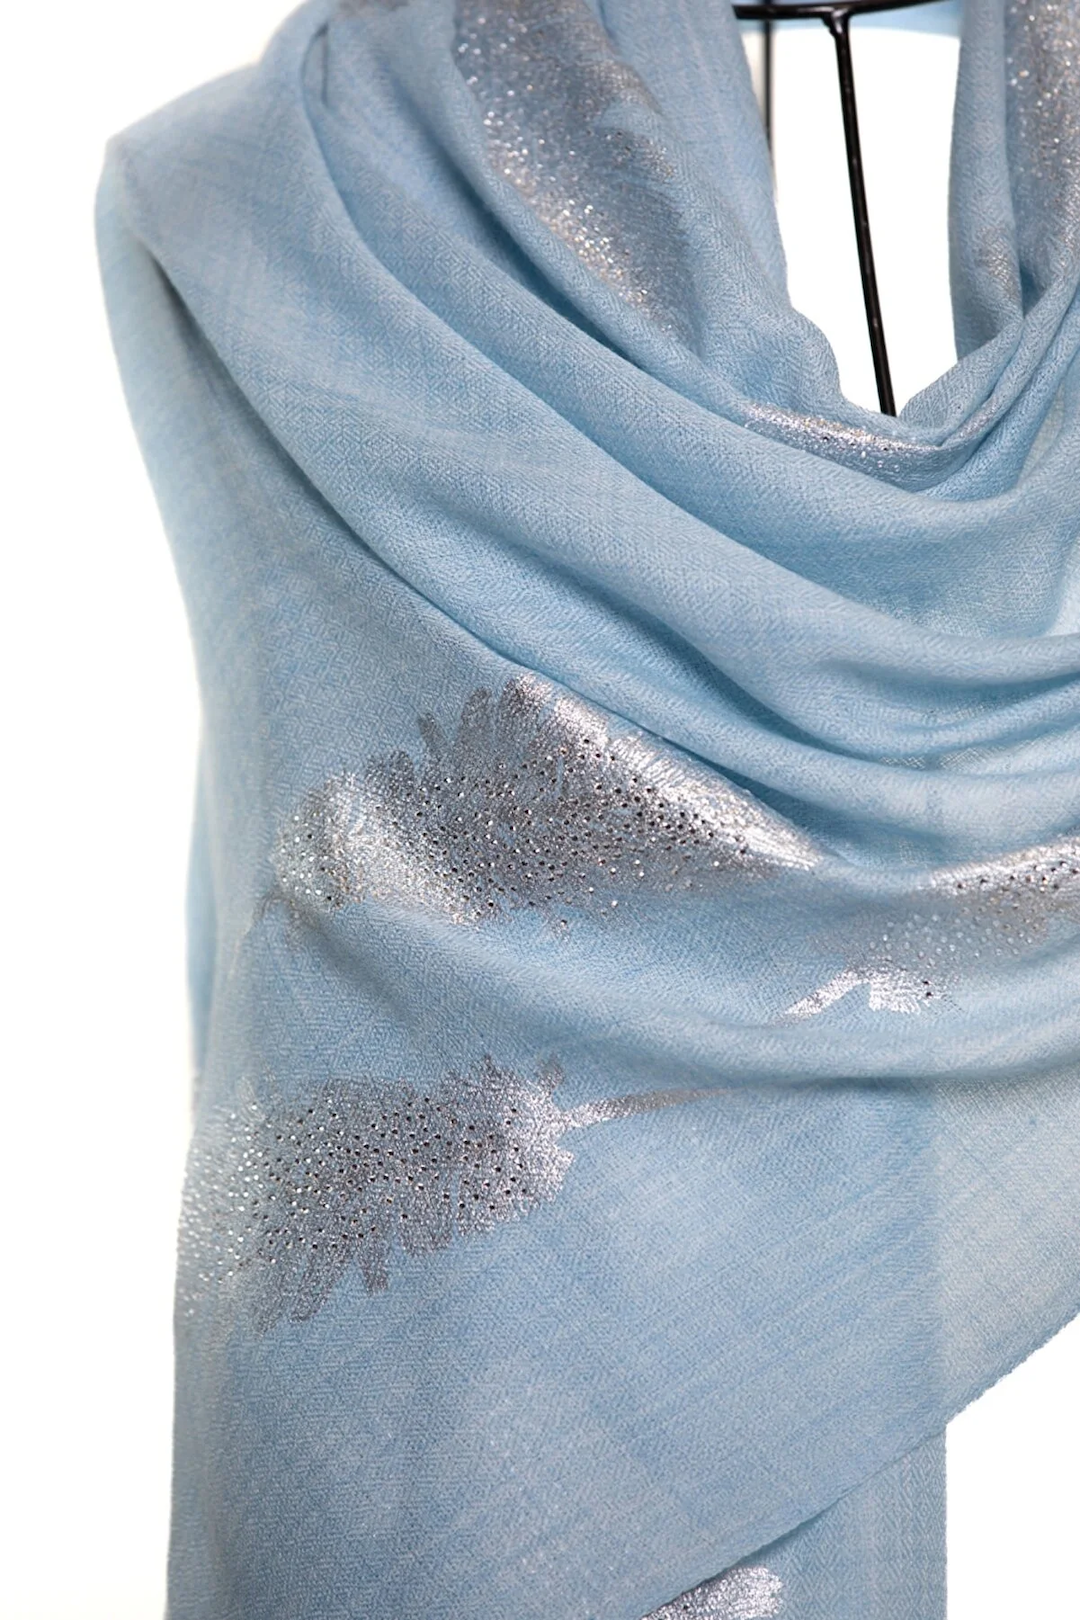 Angel Feathers Crystal Feathers Shawl Stole - Sky Blue Silver